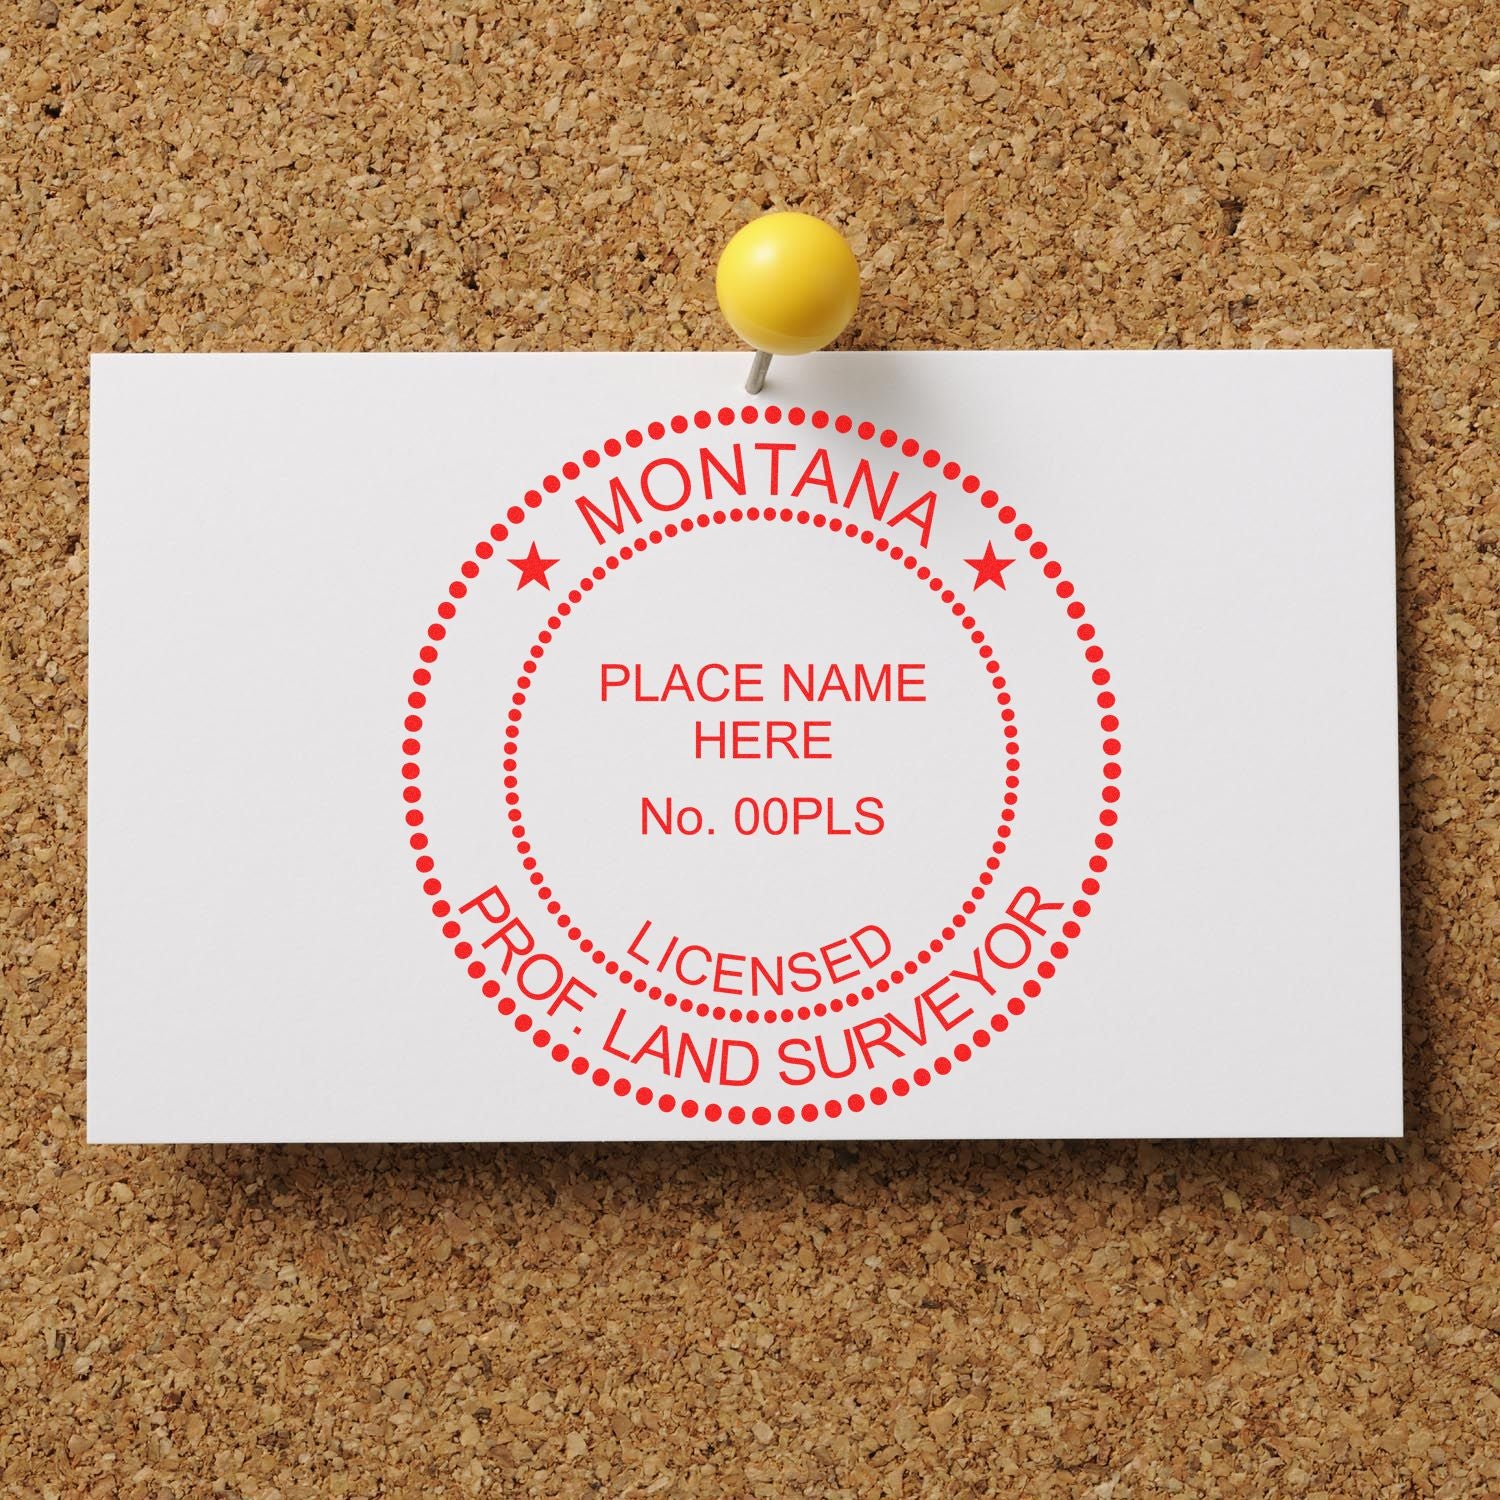 The Essential Guide to Montana Land Surveyor Stamp Guidelines feature image